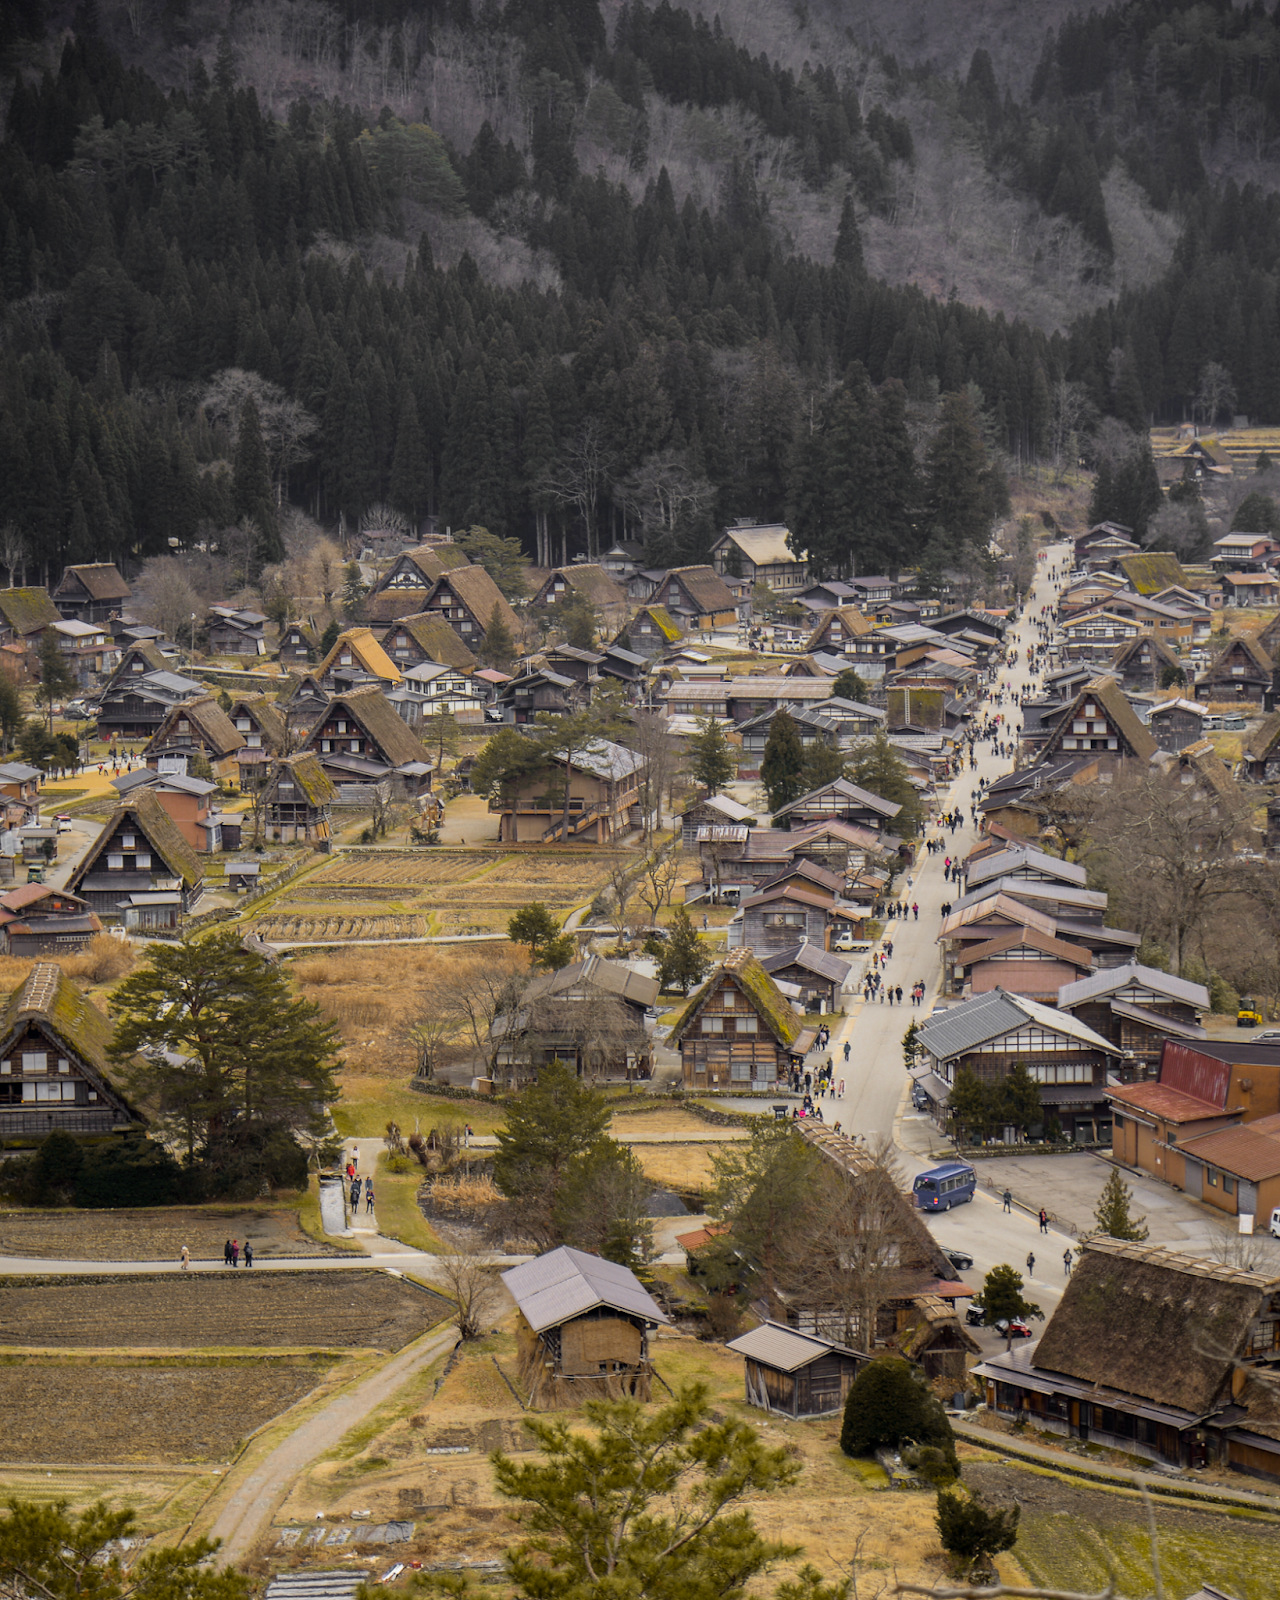 Shirakawago, UNESCO site in Japan, Kanazawa trip from Tokyo, must-visit cities in Japan, photogenic and charming towns in Japan - FOREVERVANNY